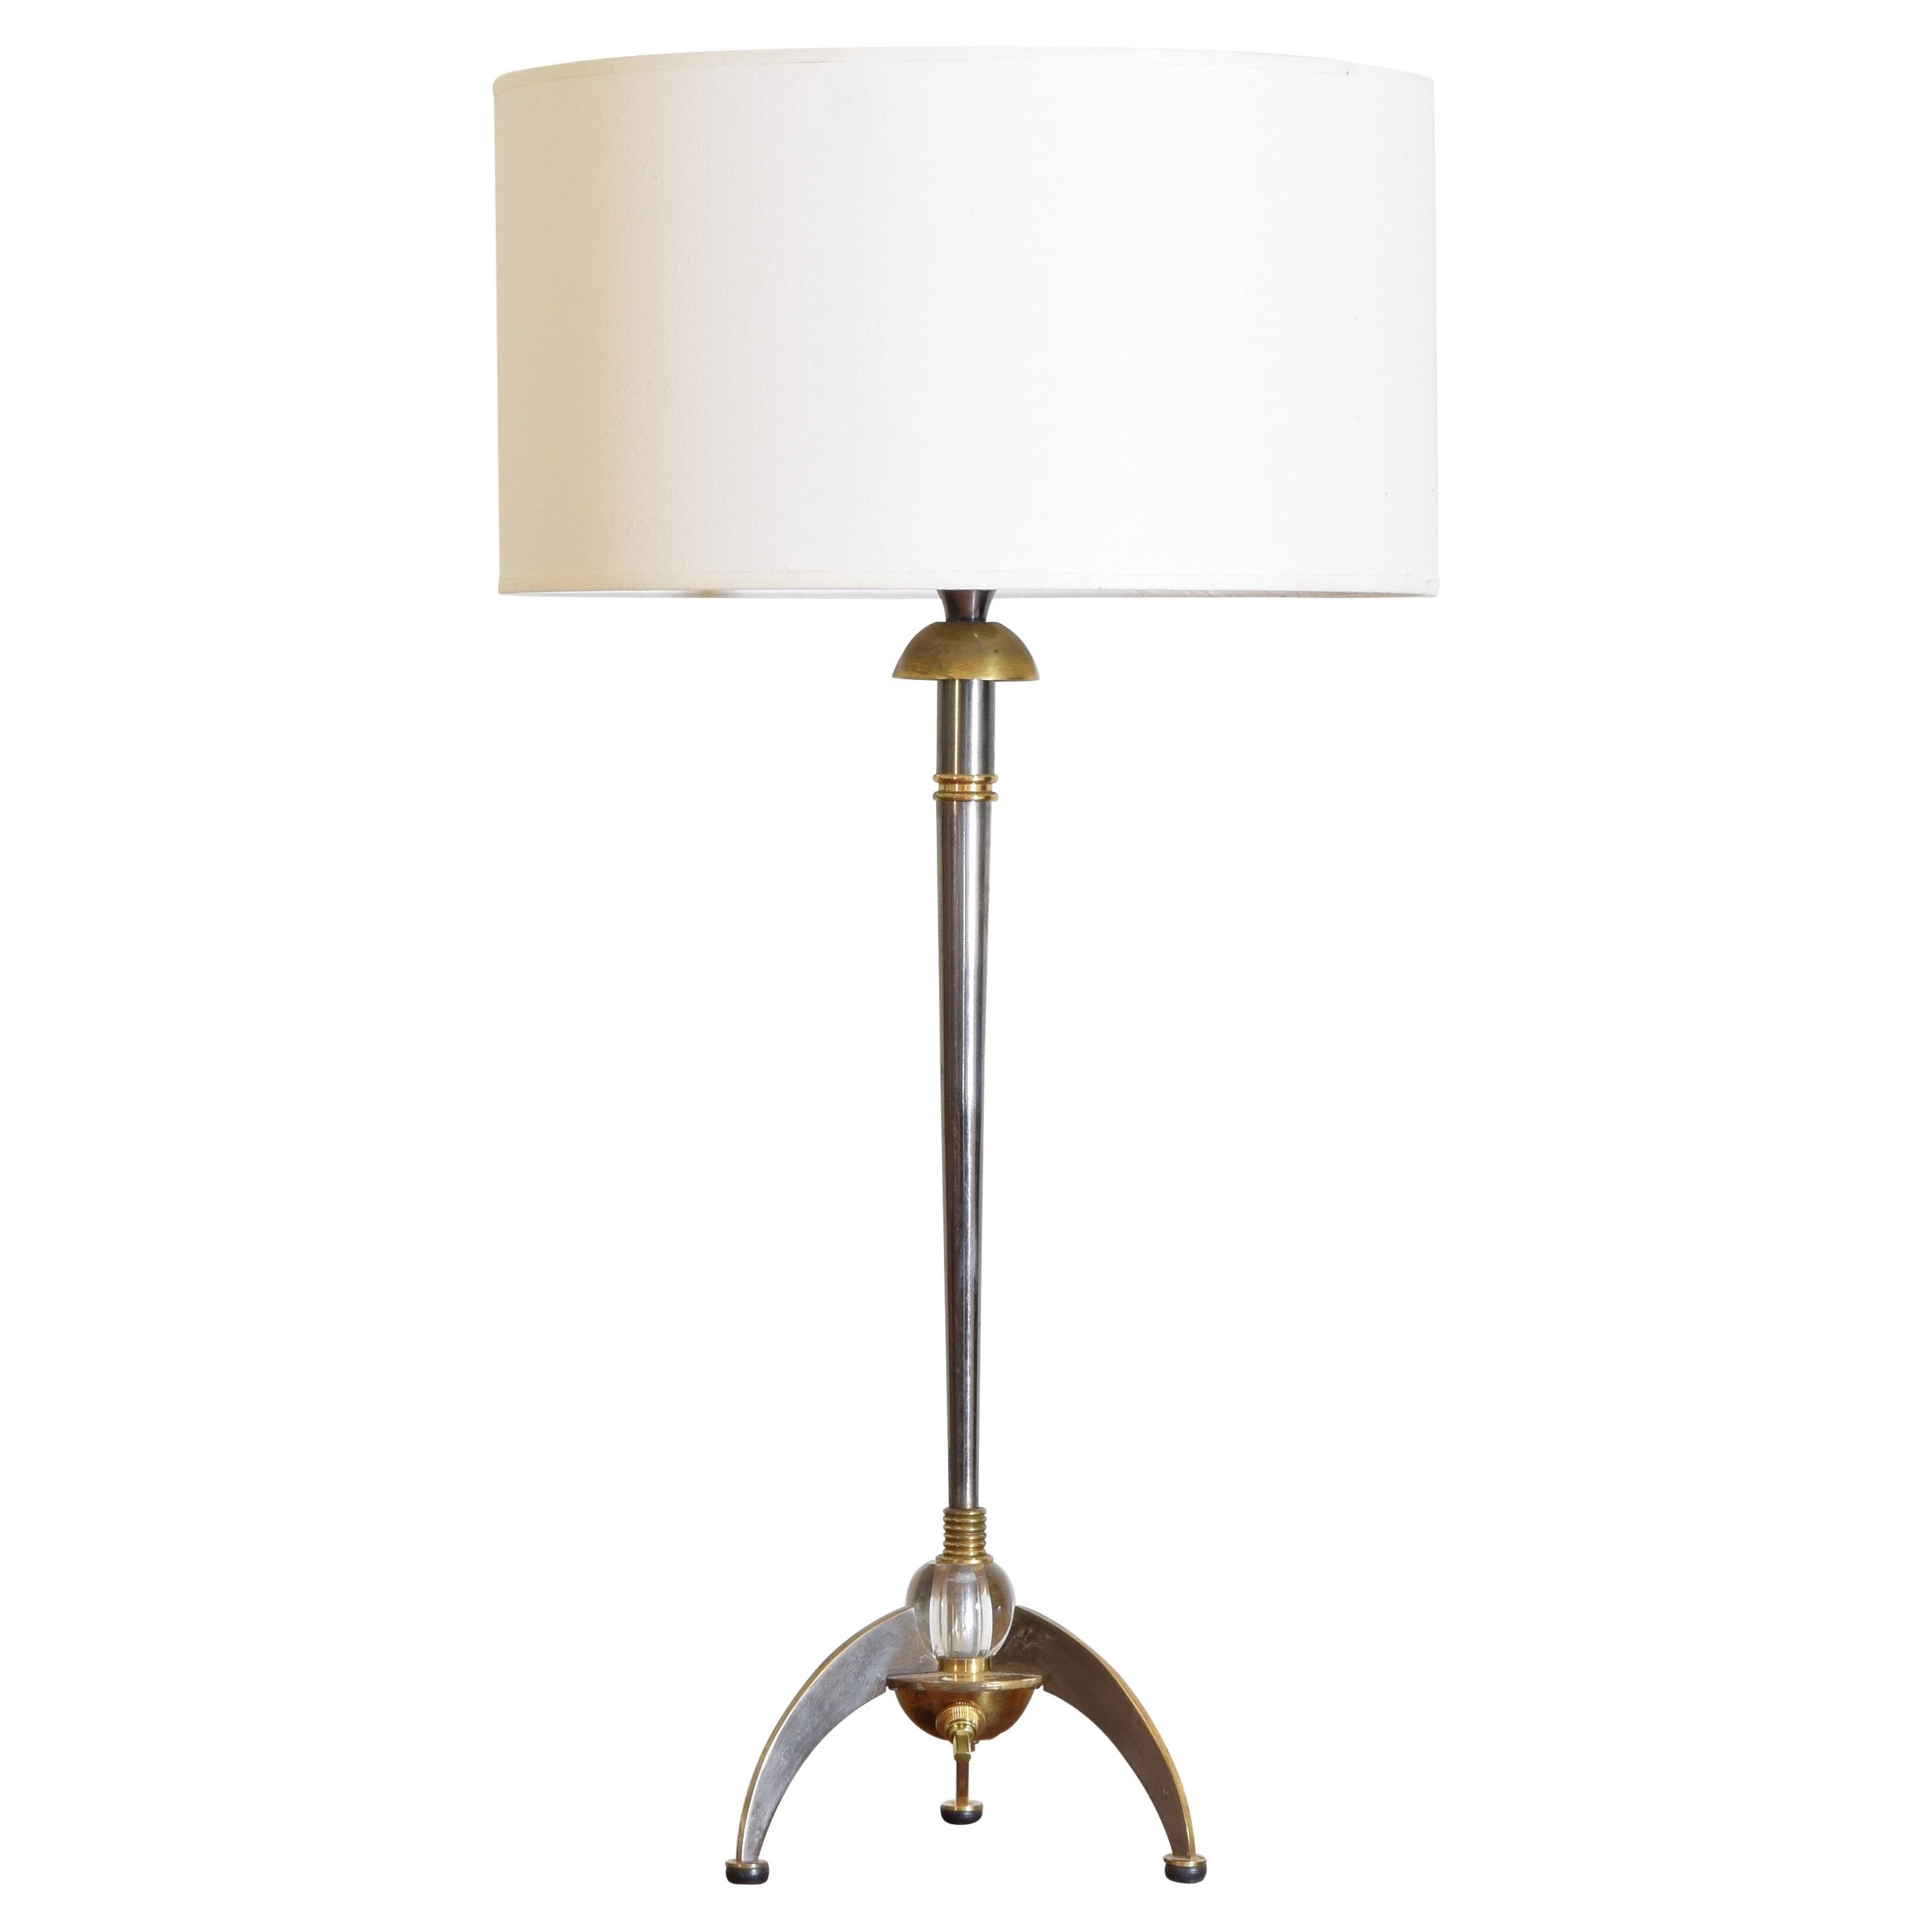 Continental Chrome, Brass, & Glass Table Lamp, 2nd half 20th century For Sale